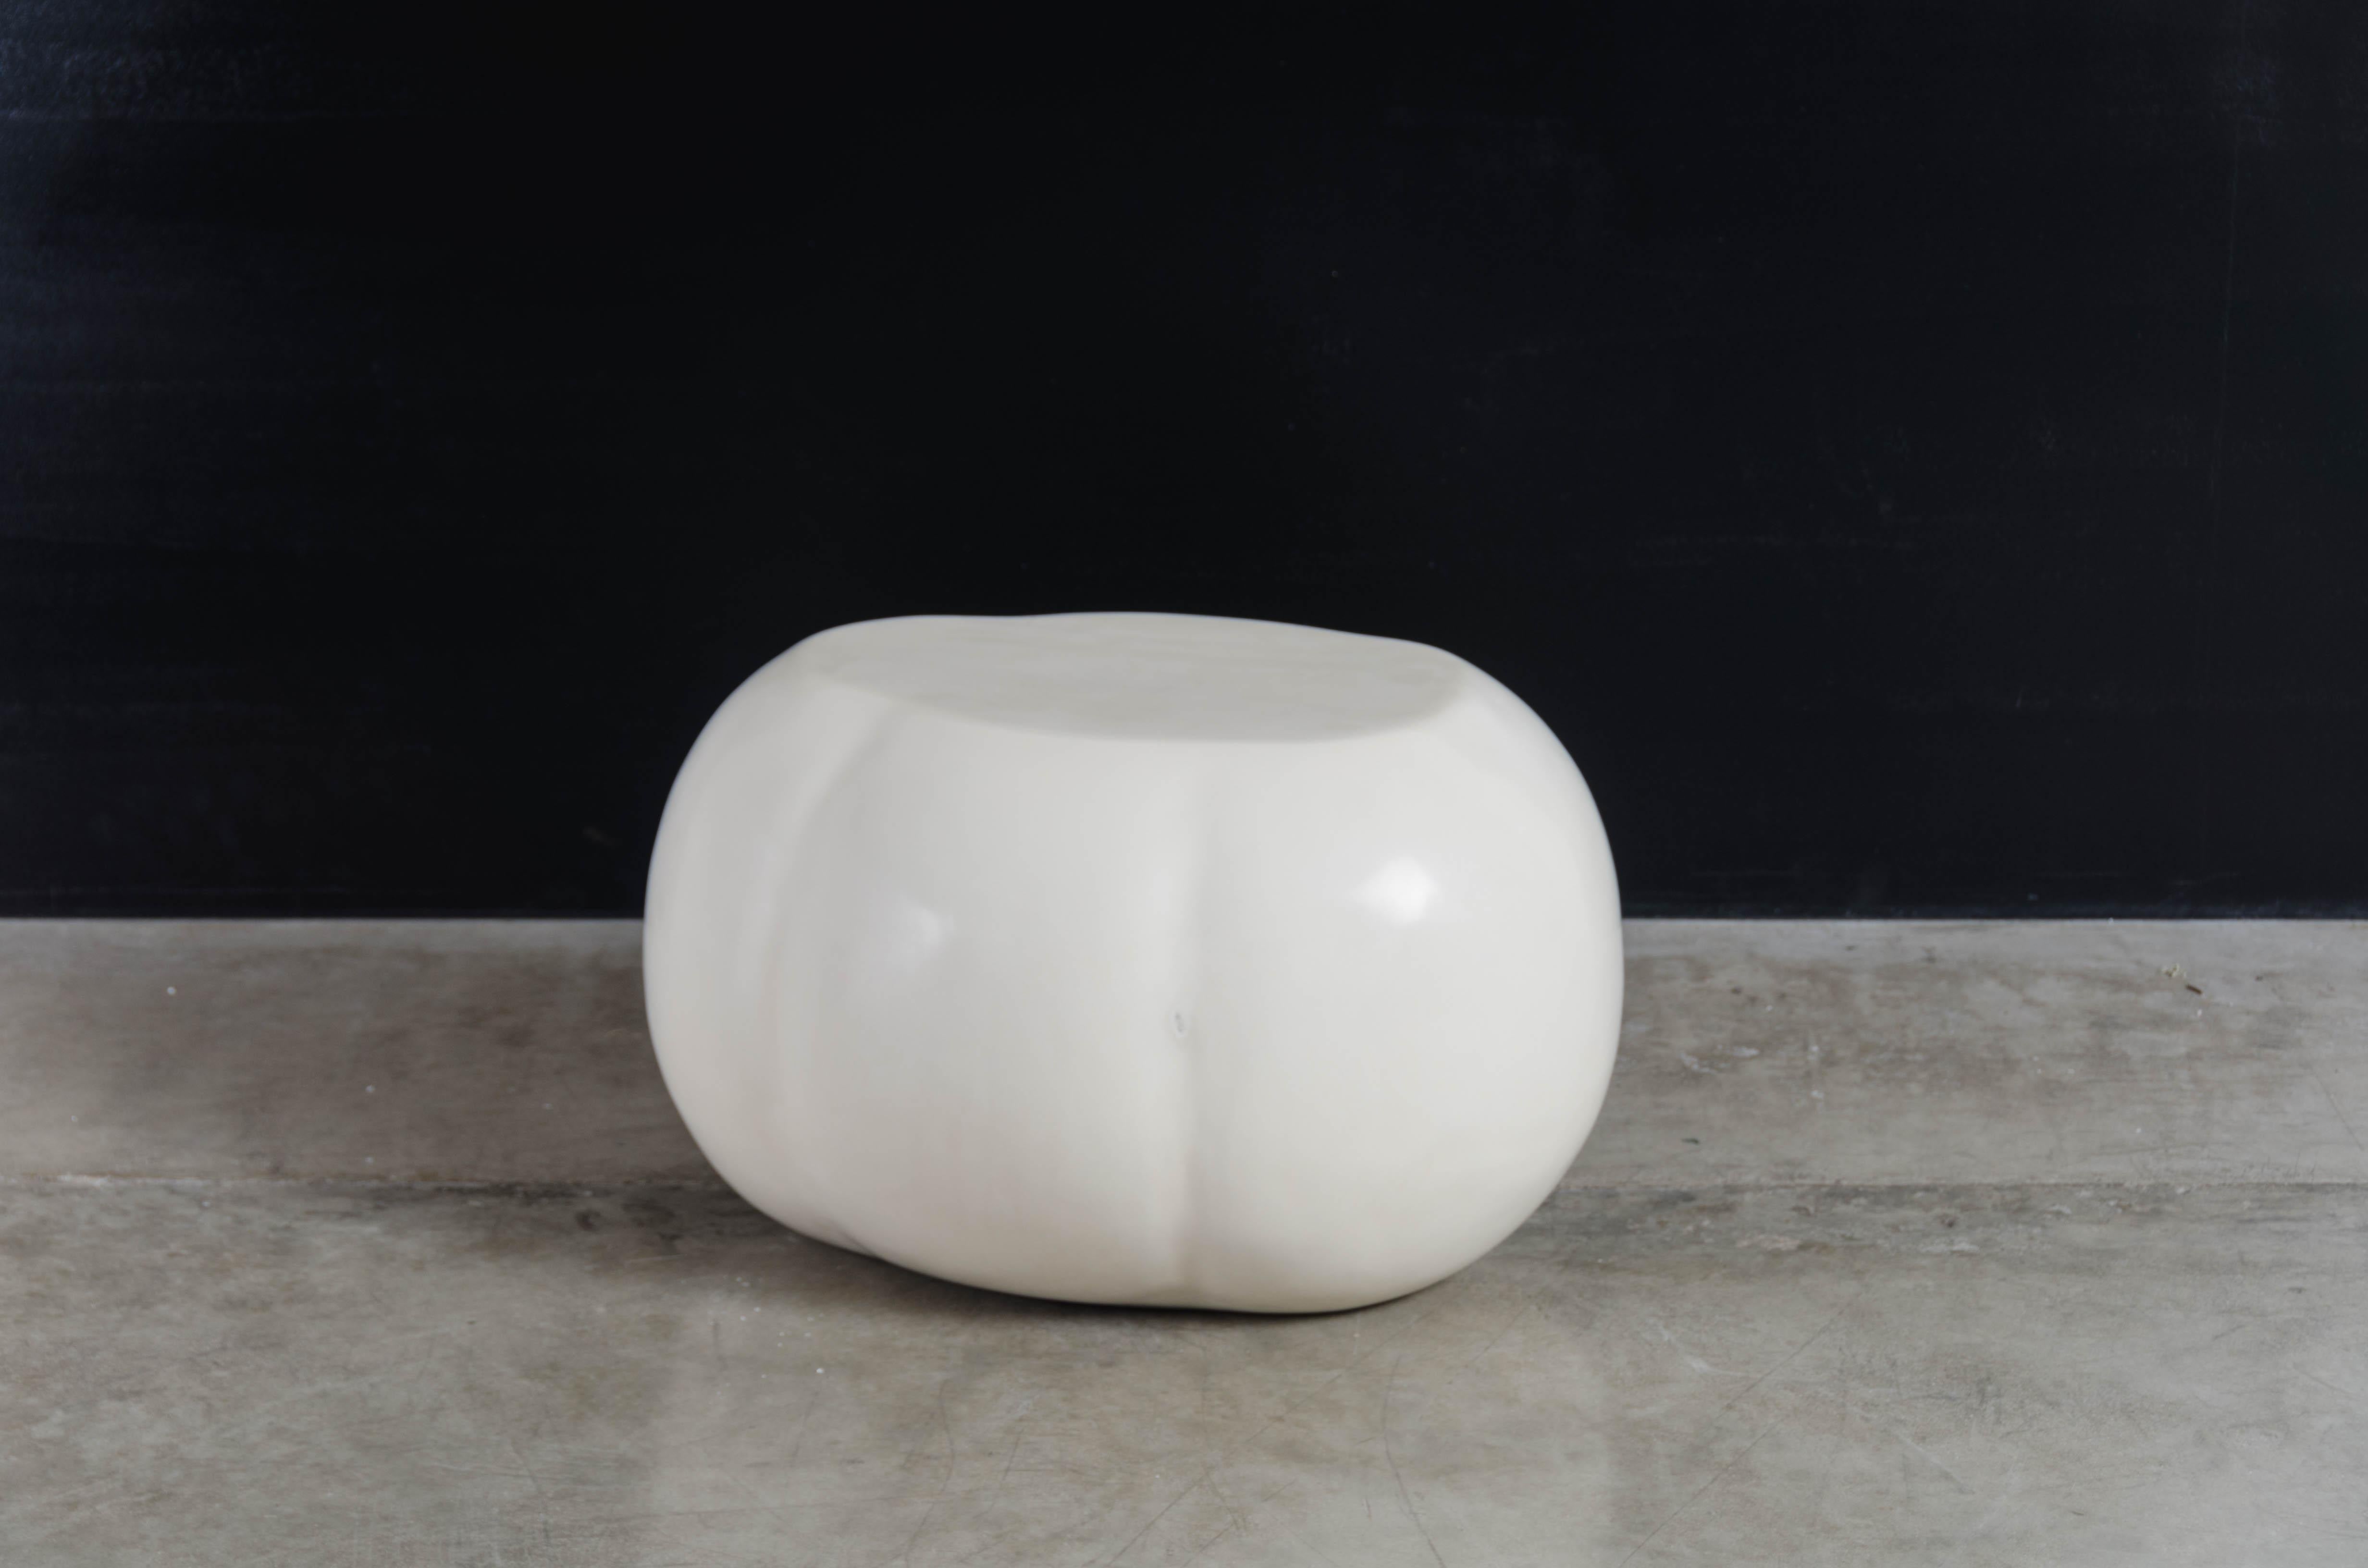 Repoussé Pong Cloud Seat, Medium, Cream Lacquer by Robert Kuo, Hand Repousse, Limited For Sale